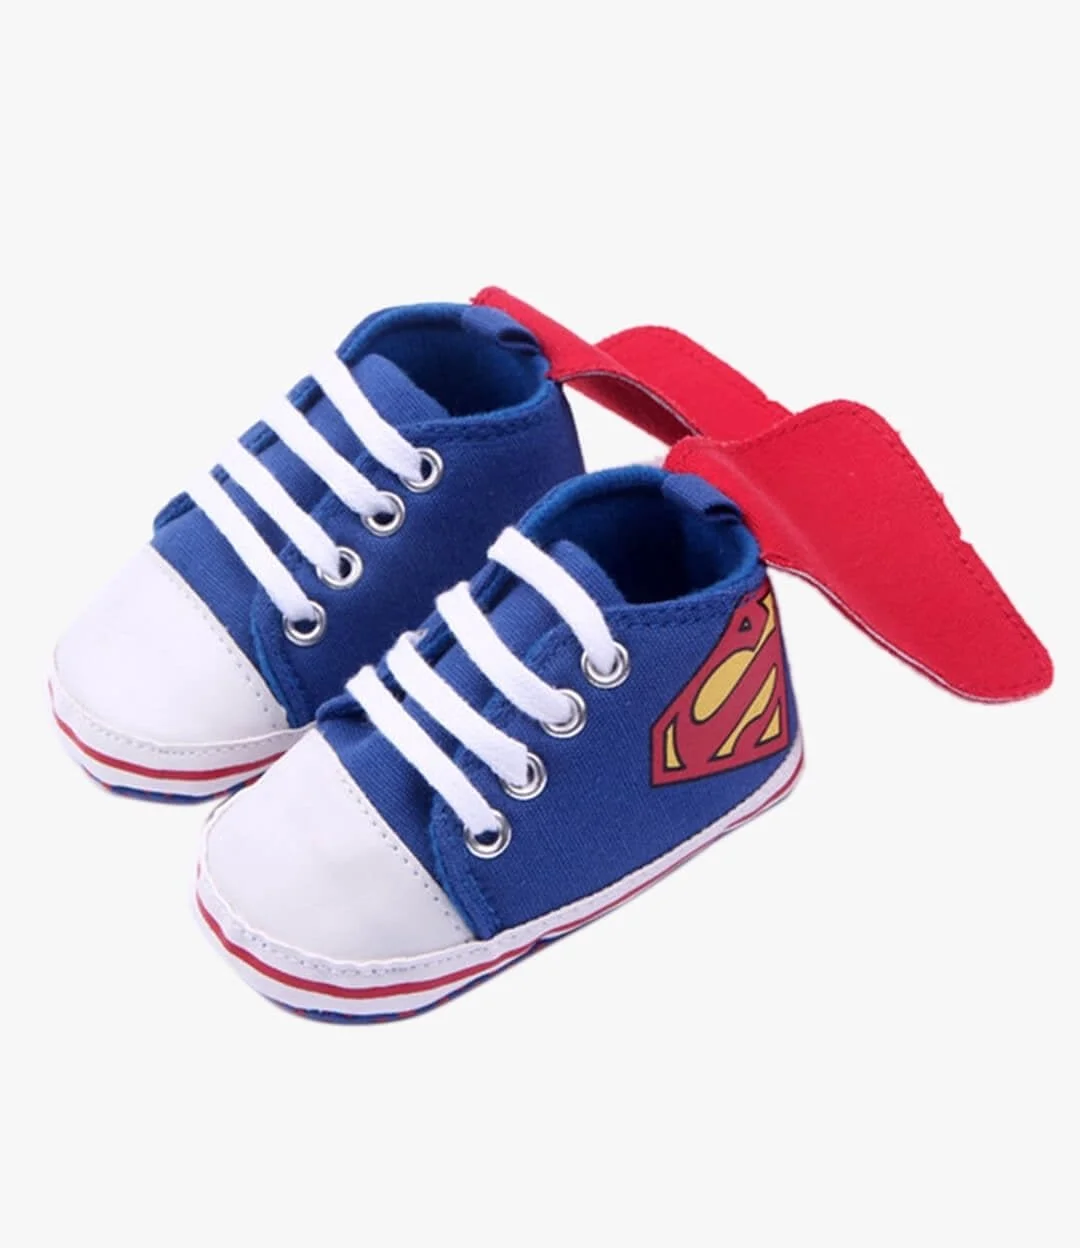 Superman Baby Shoes by Fofinha 